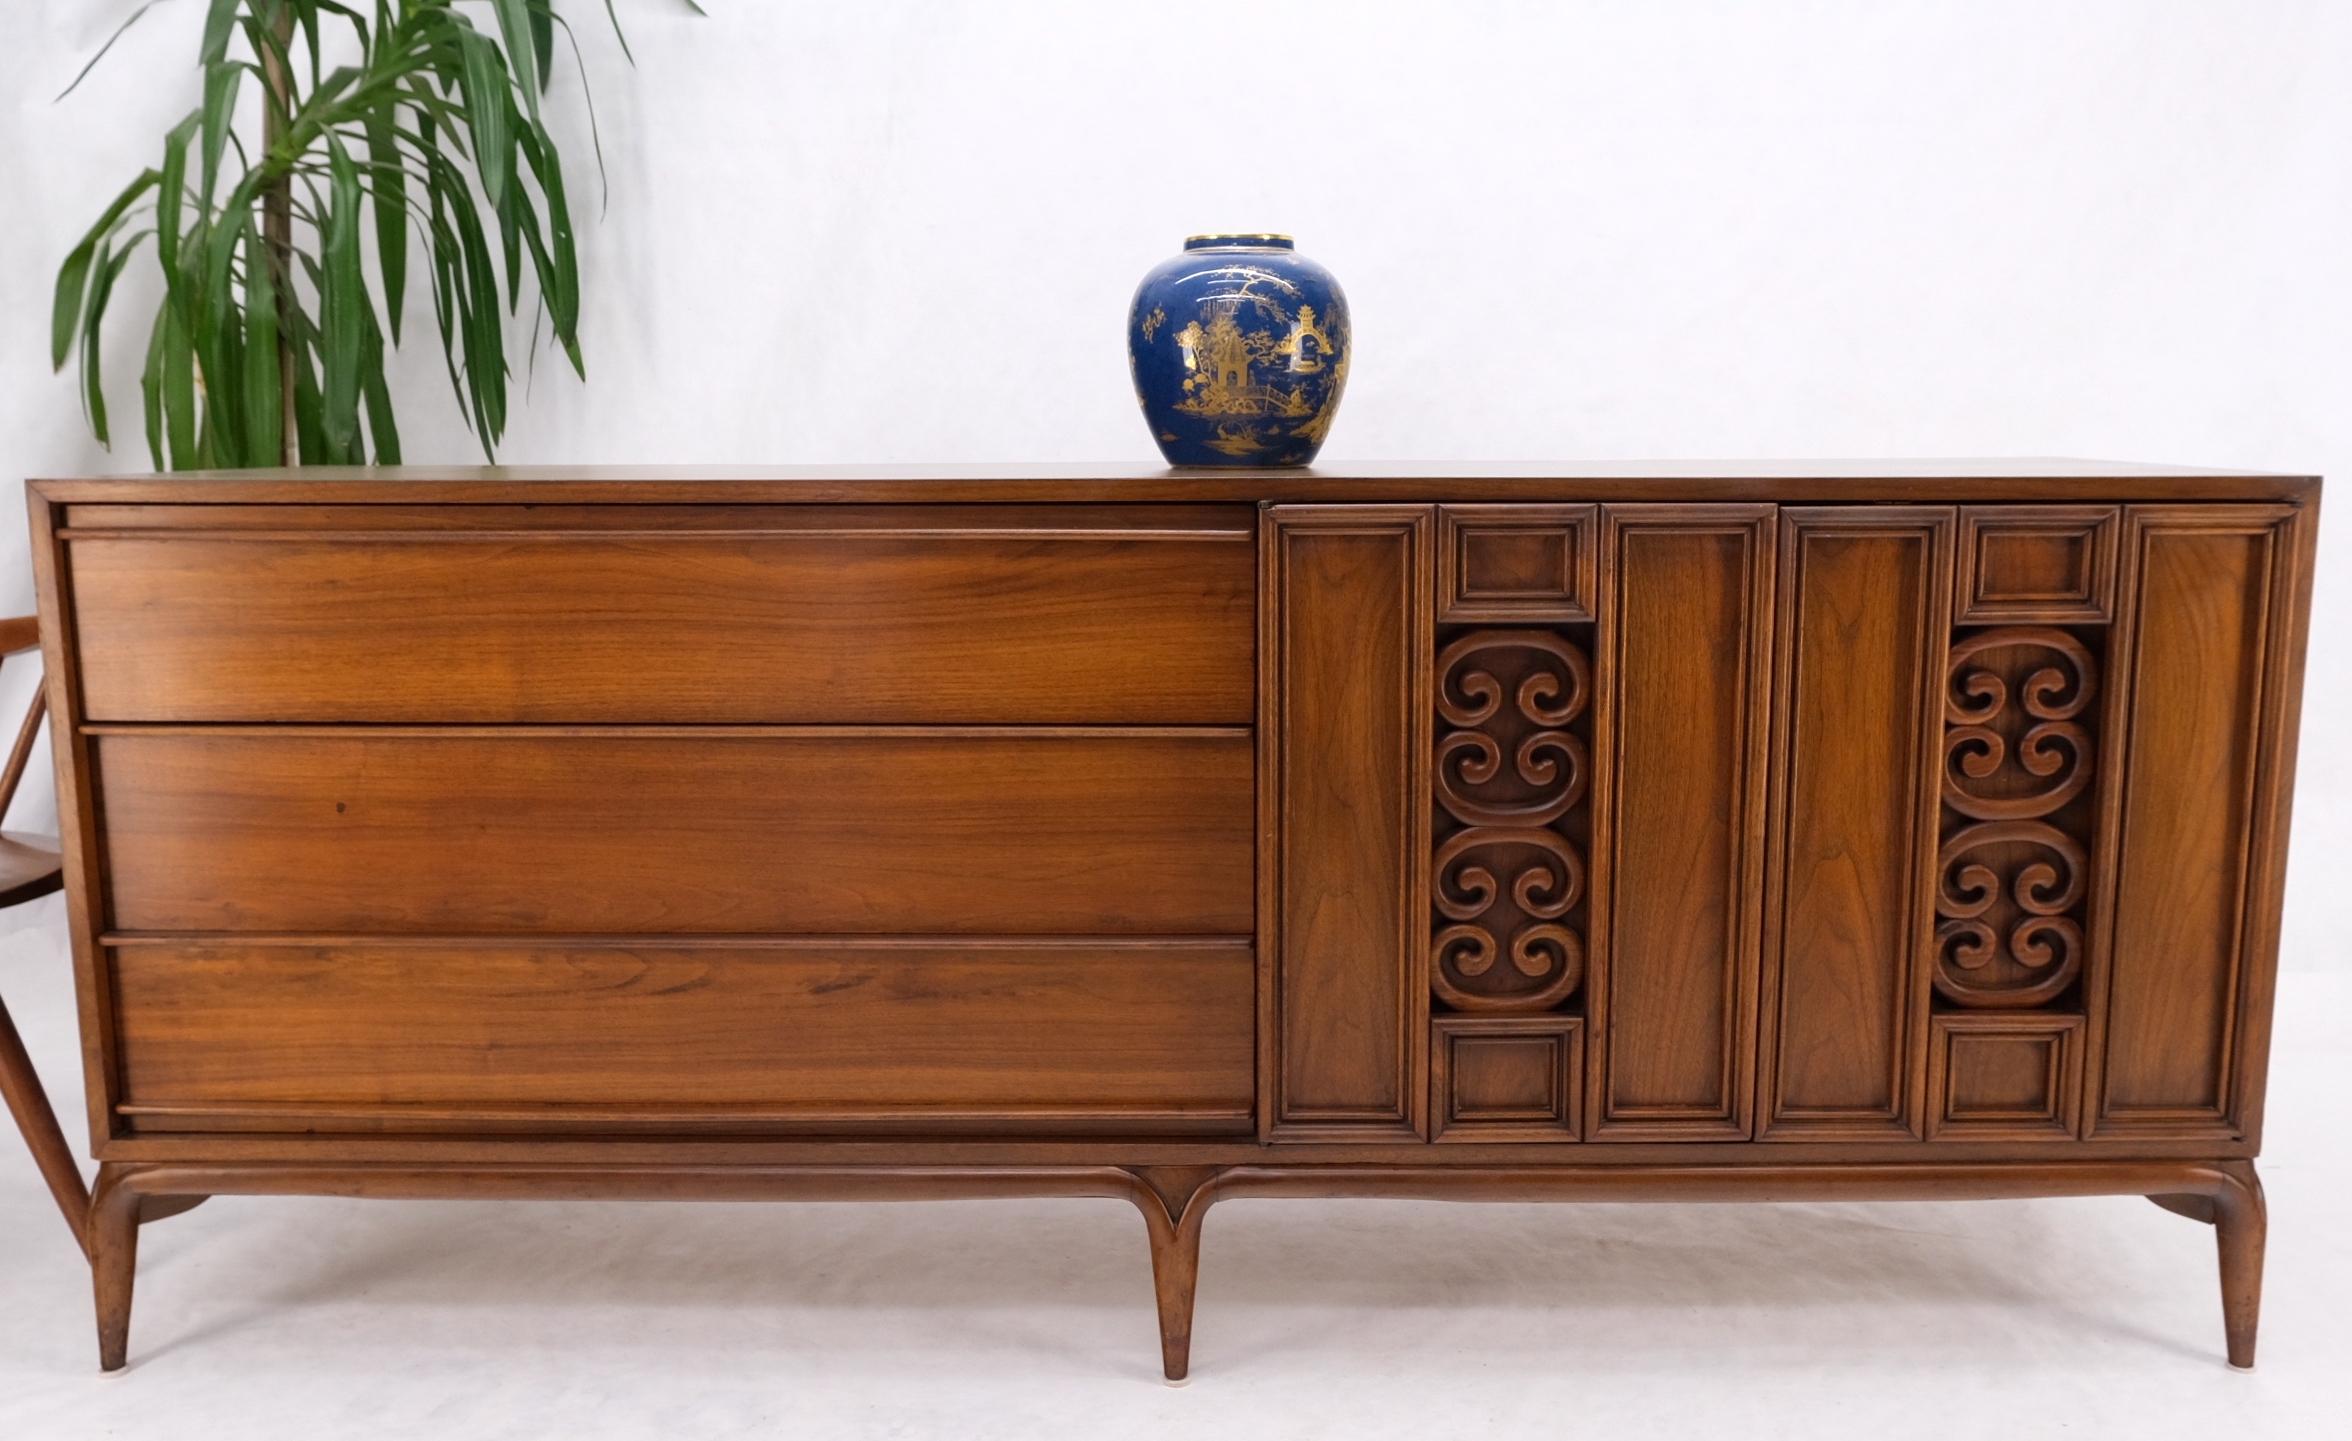 Danish Mid-Century Walnut 6 Drawers Long Credenza Dresser w/ Carved Double Doors For Sale 6